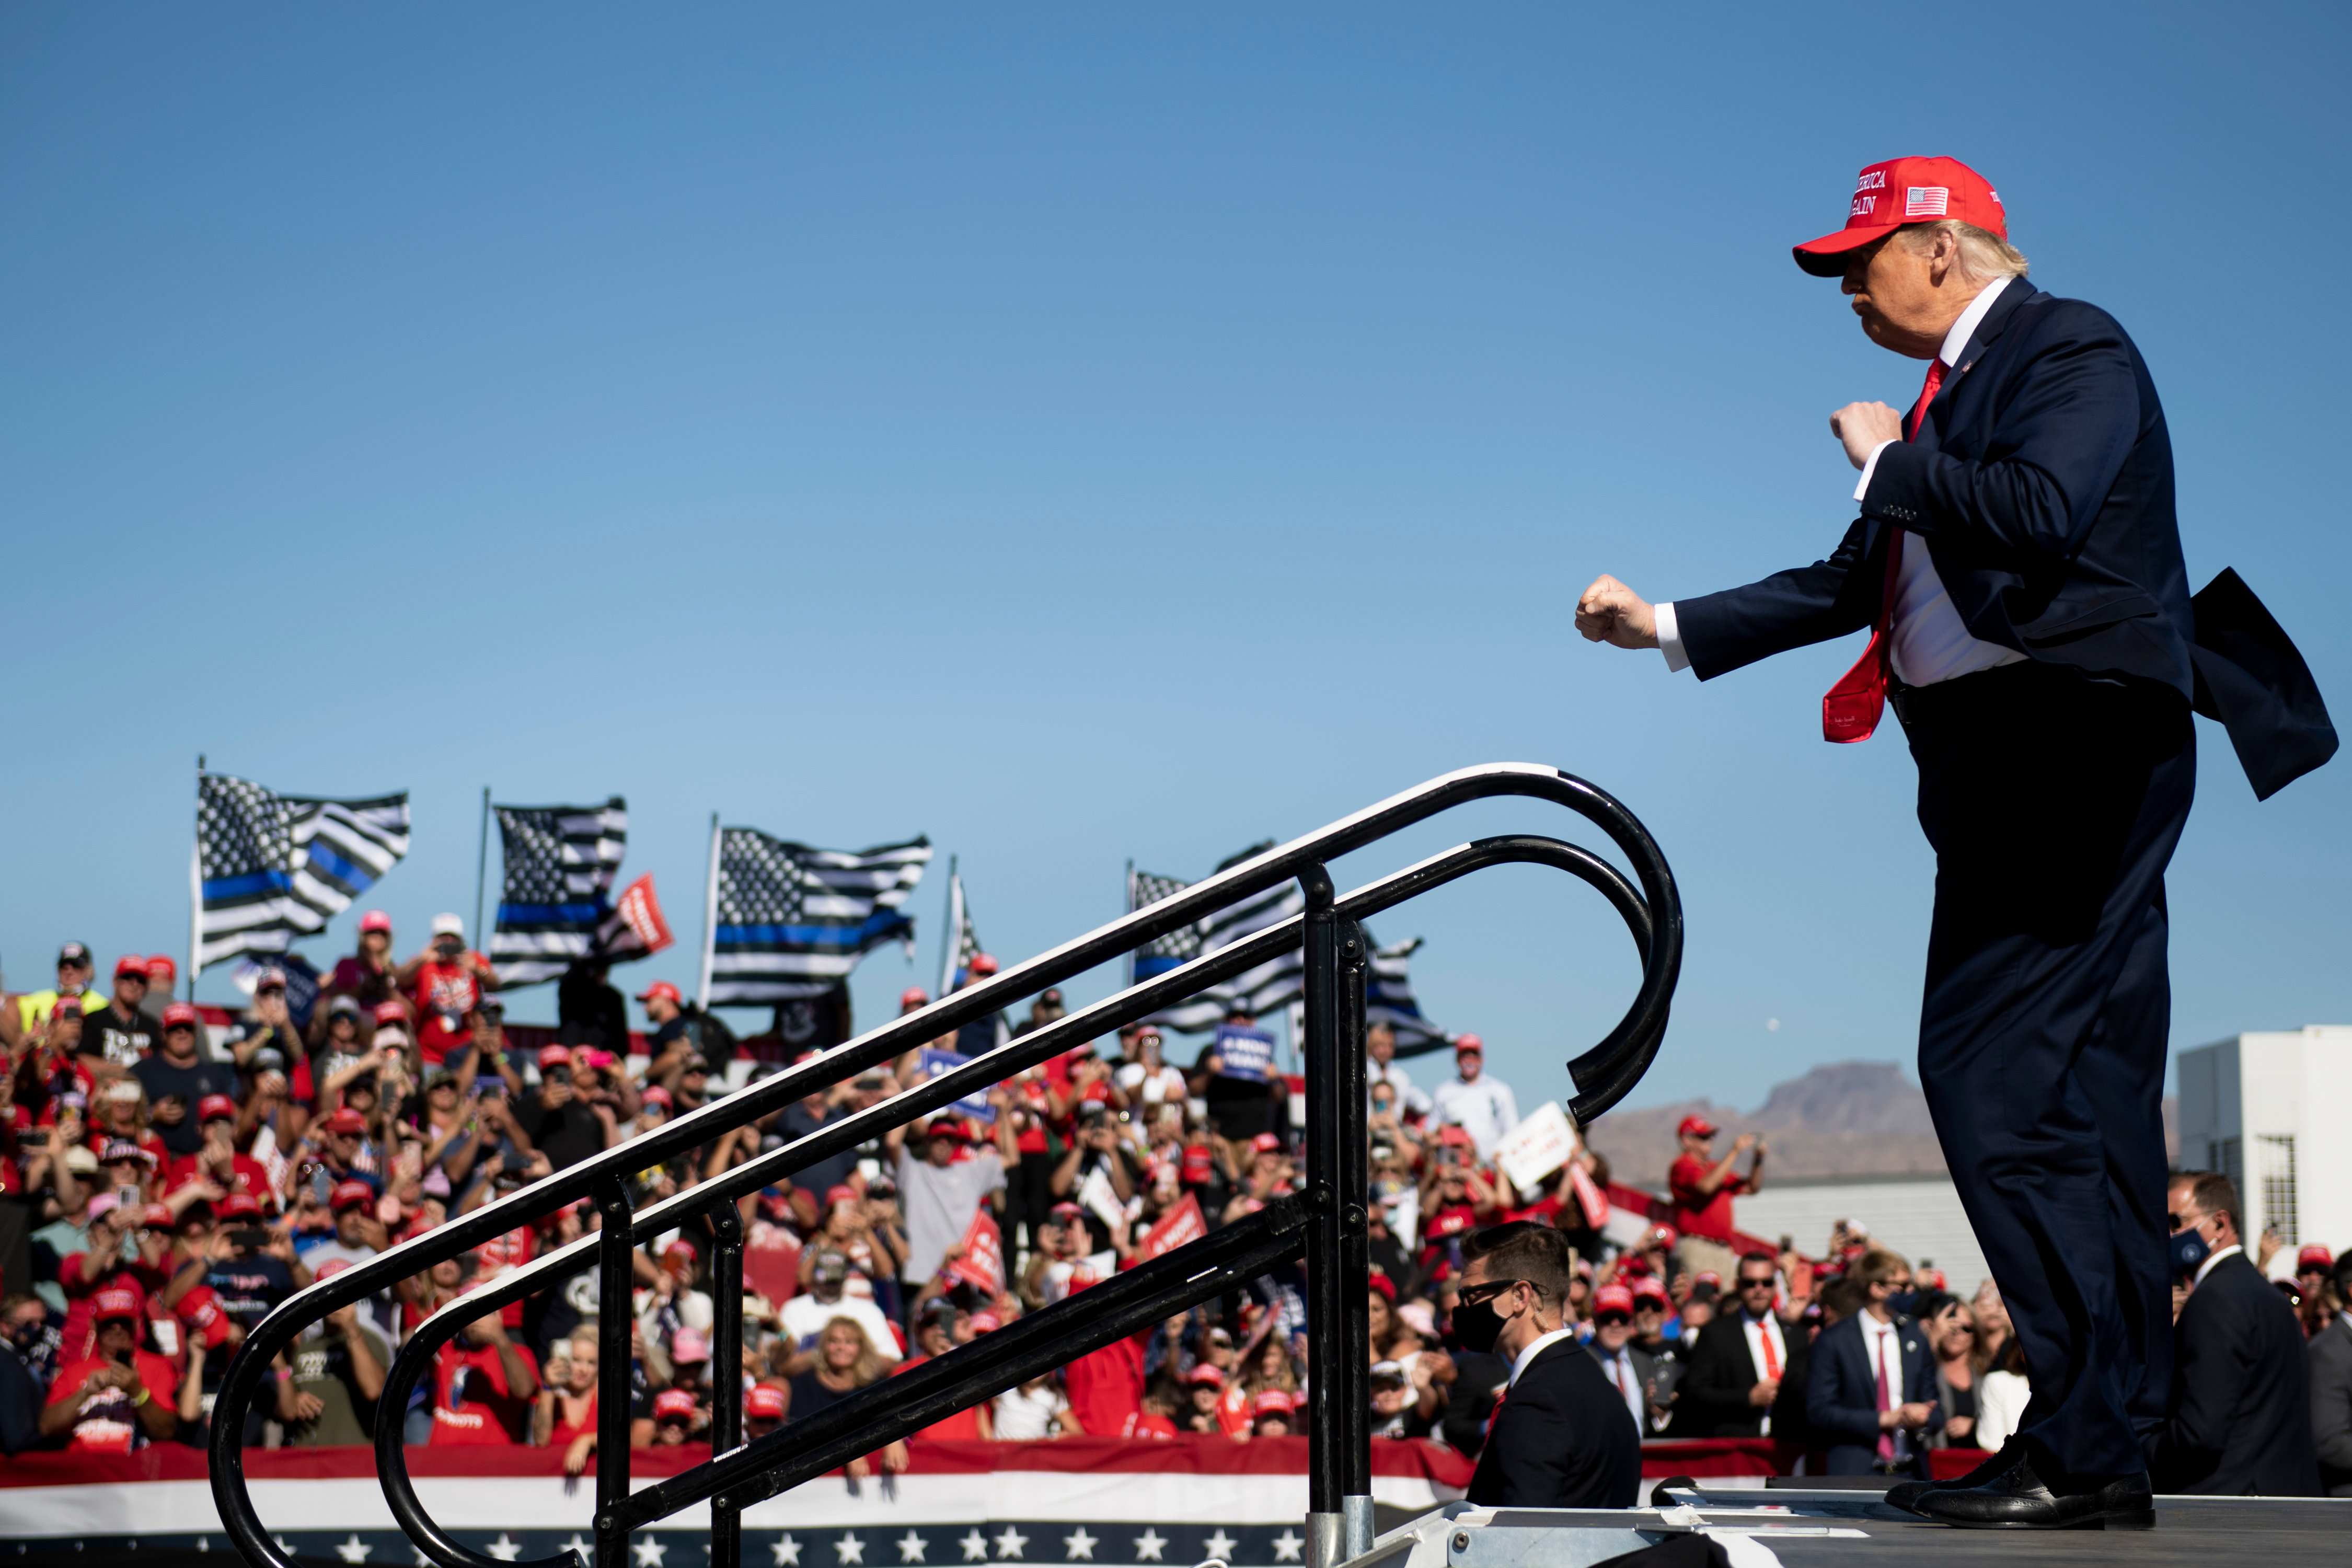 US President Donald Trump dances as he leaves after speaking during a Make America Great Again rally at Laughlin/Bullhead International Airport October 28, 2020, in Bullhead City, Arizona. (Photo by Brendan Smialowski / AFP) (Photo by BRENDAN SMIALOWSKI/AFP via Getty Images)